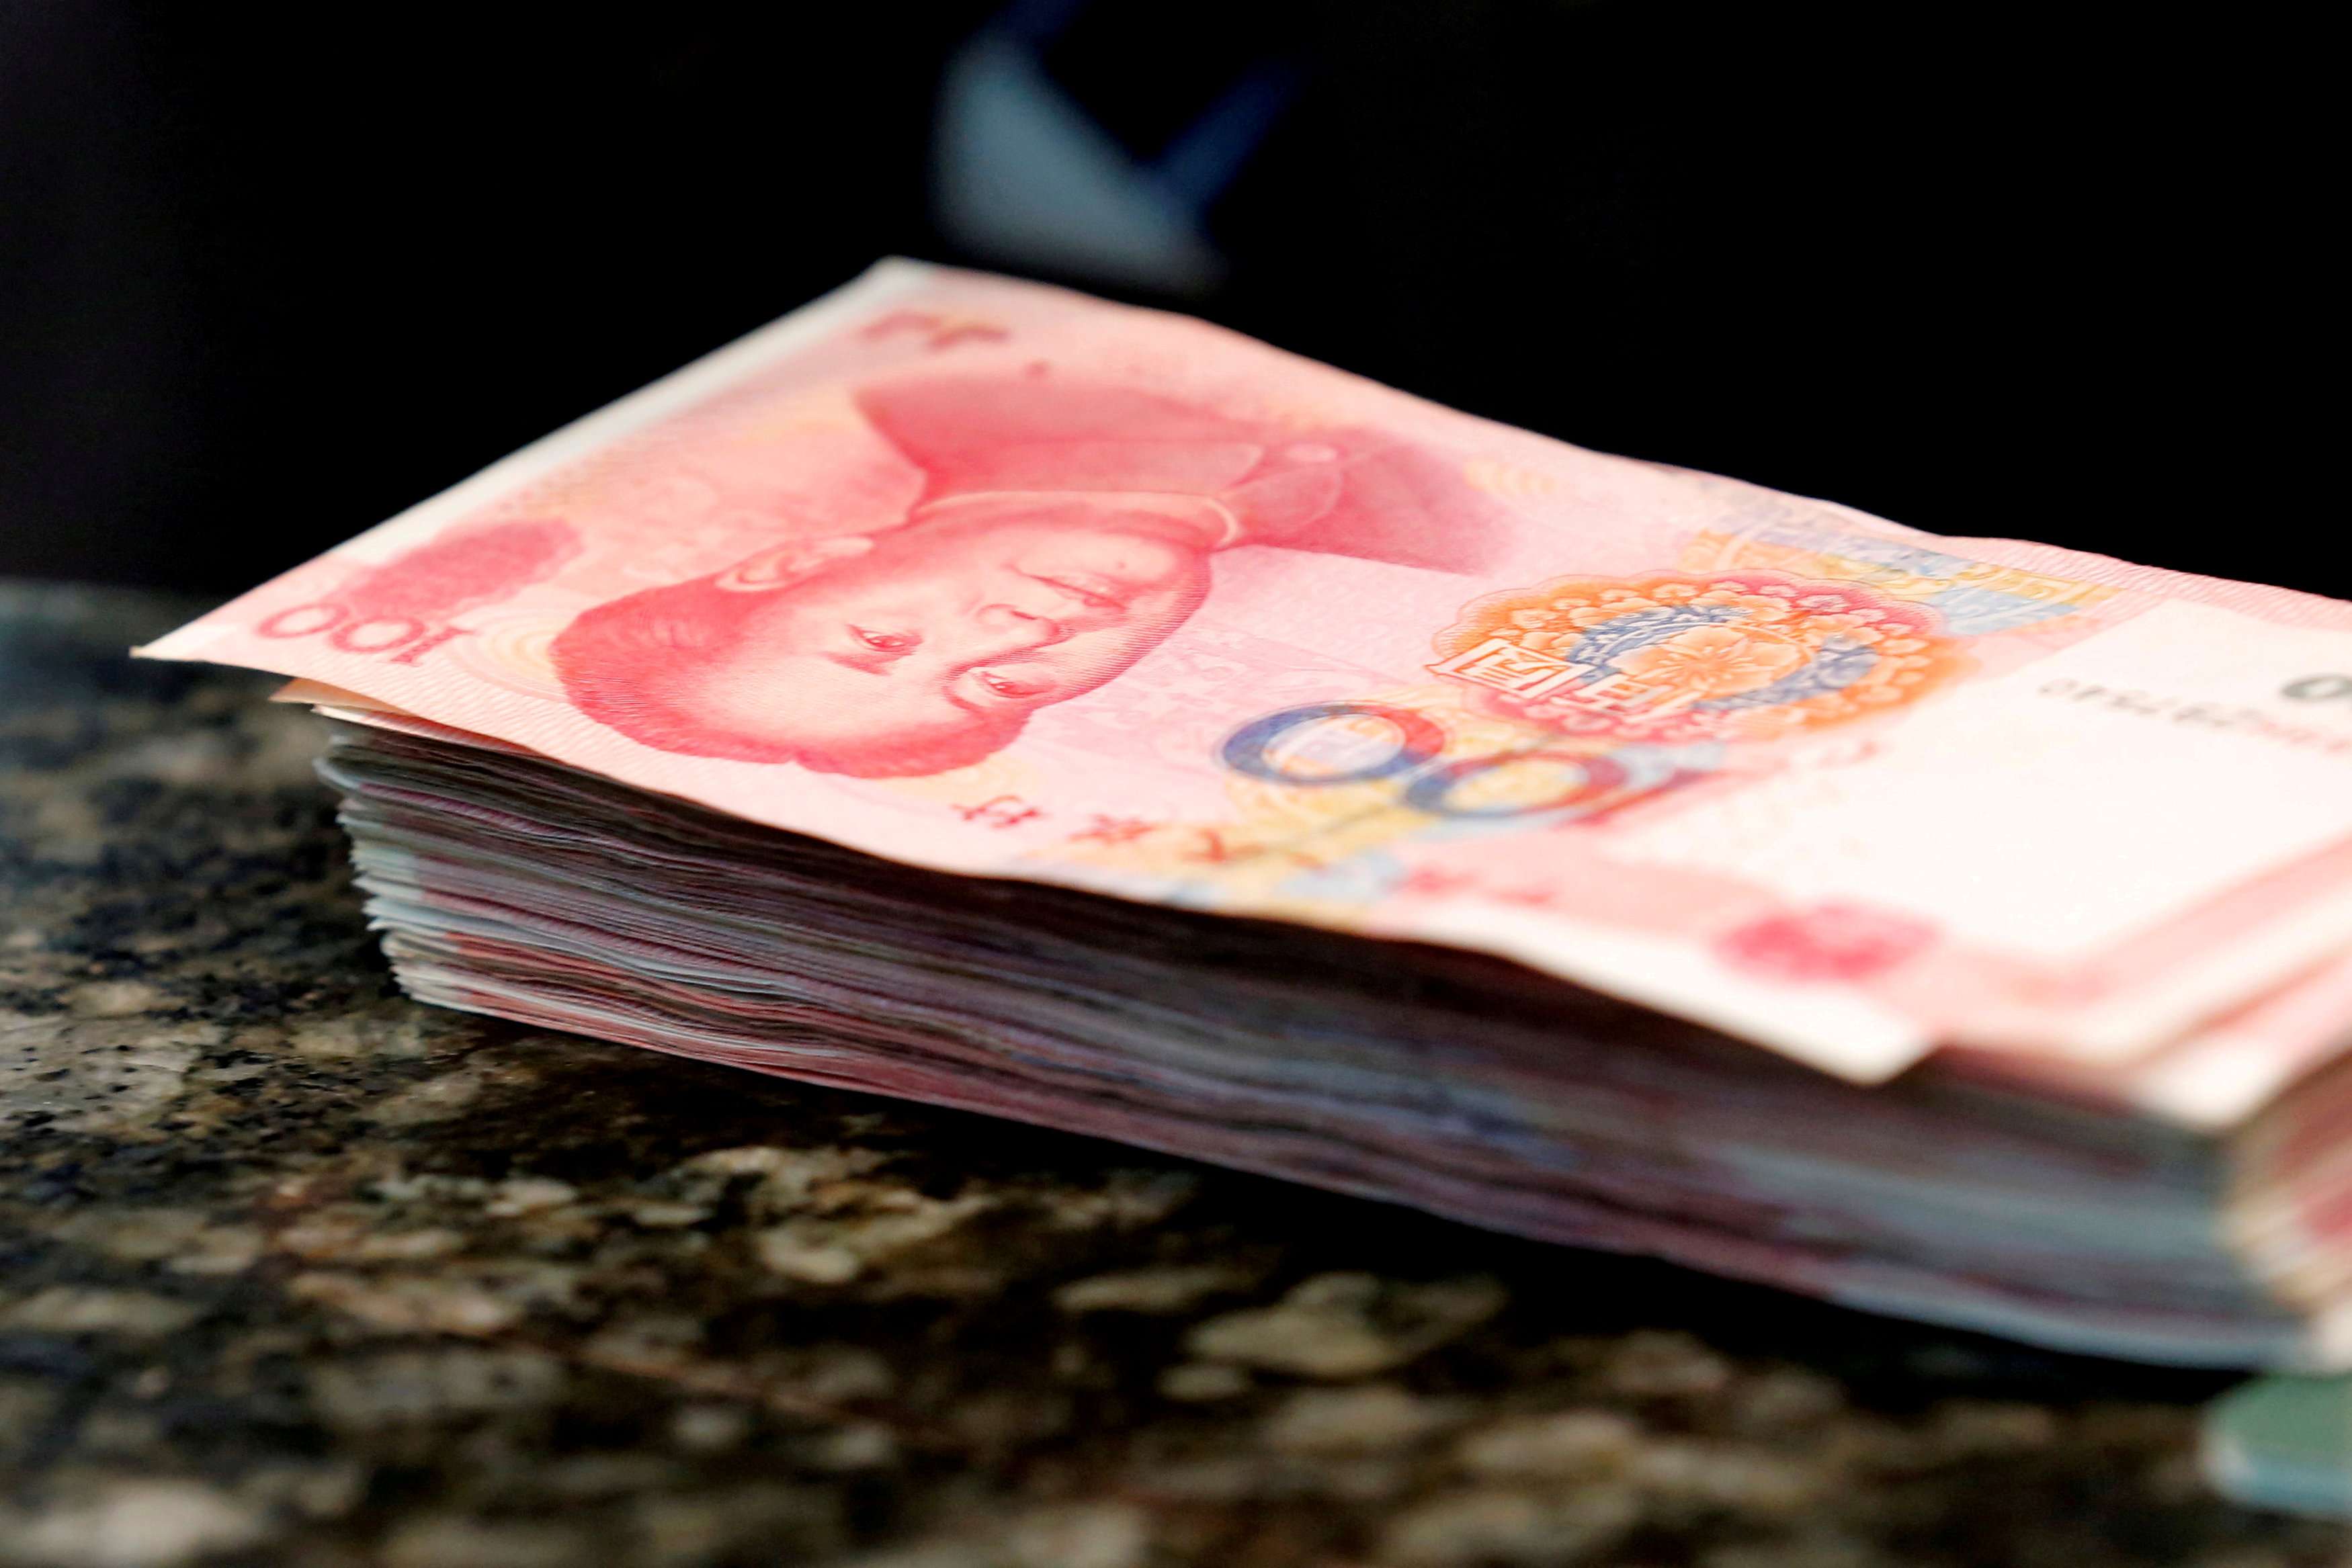 President-elect Donald Trump has called China the greatest currency manipulator, but criticism out of Washington against the yuan goes back a decade. Photo: Reuters